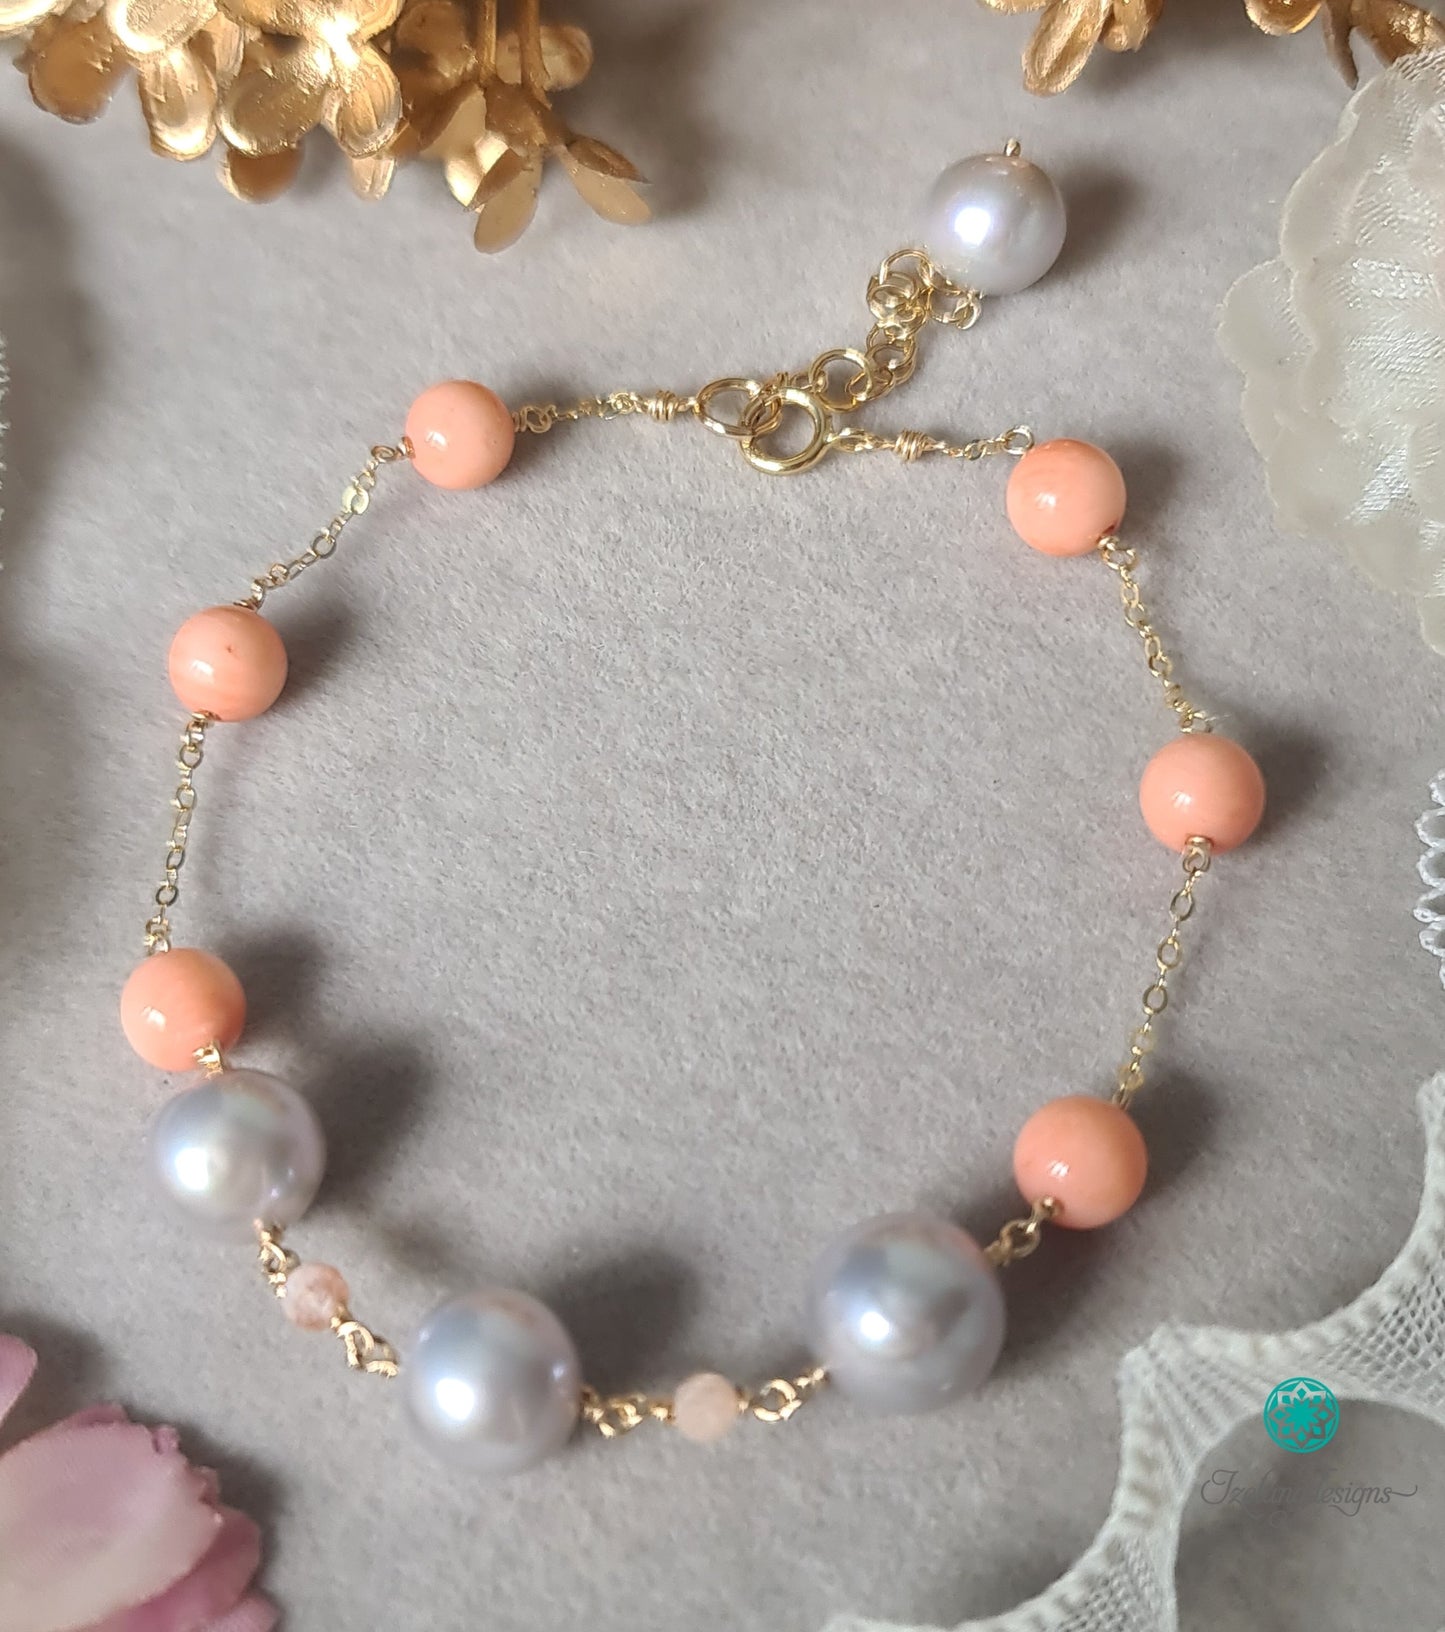 8mm Round Silvery Grey Edison Pearls with Pink Corals Bracelet-BT267